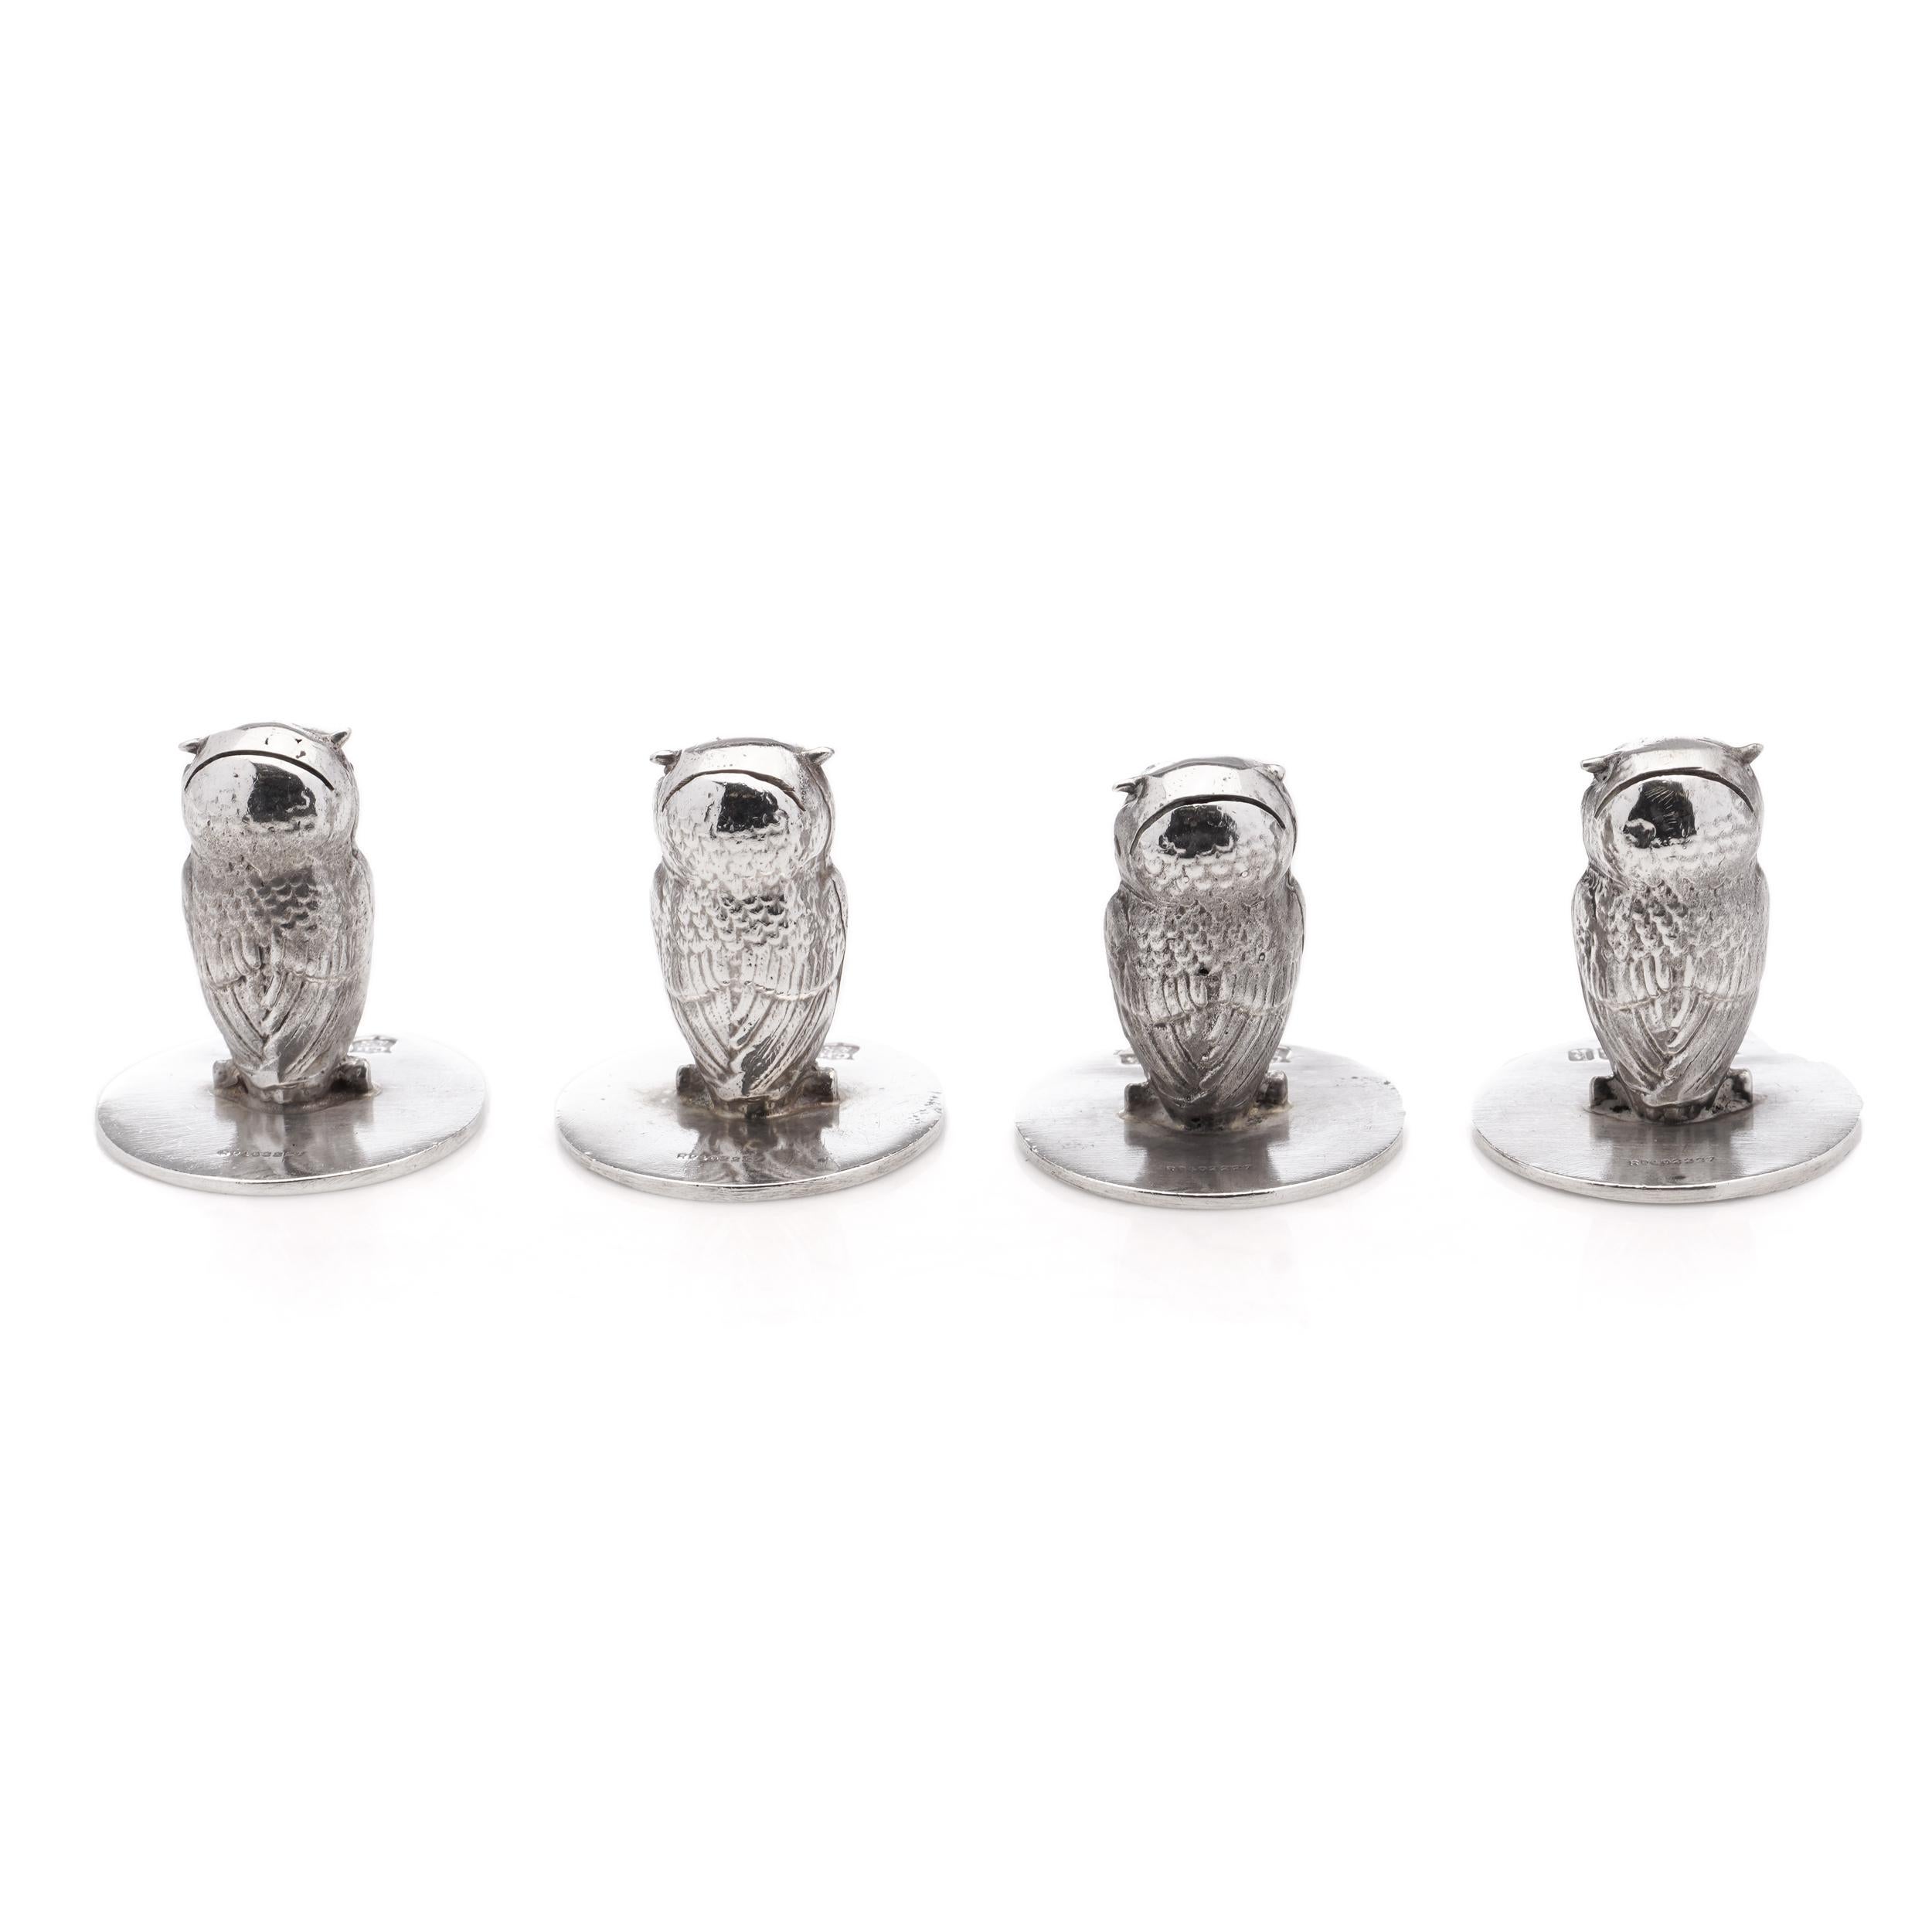 Cooper Brothers & Sons Ltd set of 4 owl-shaped place card holders In Good Condition For Sale In Braintree, GB